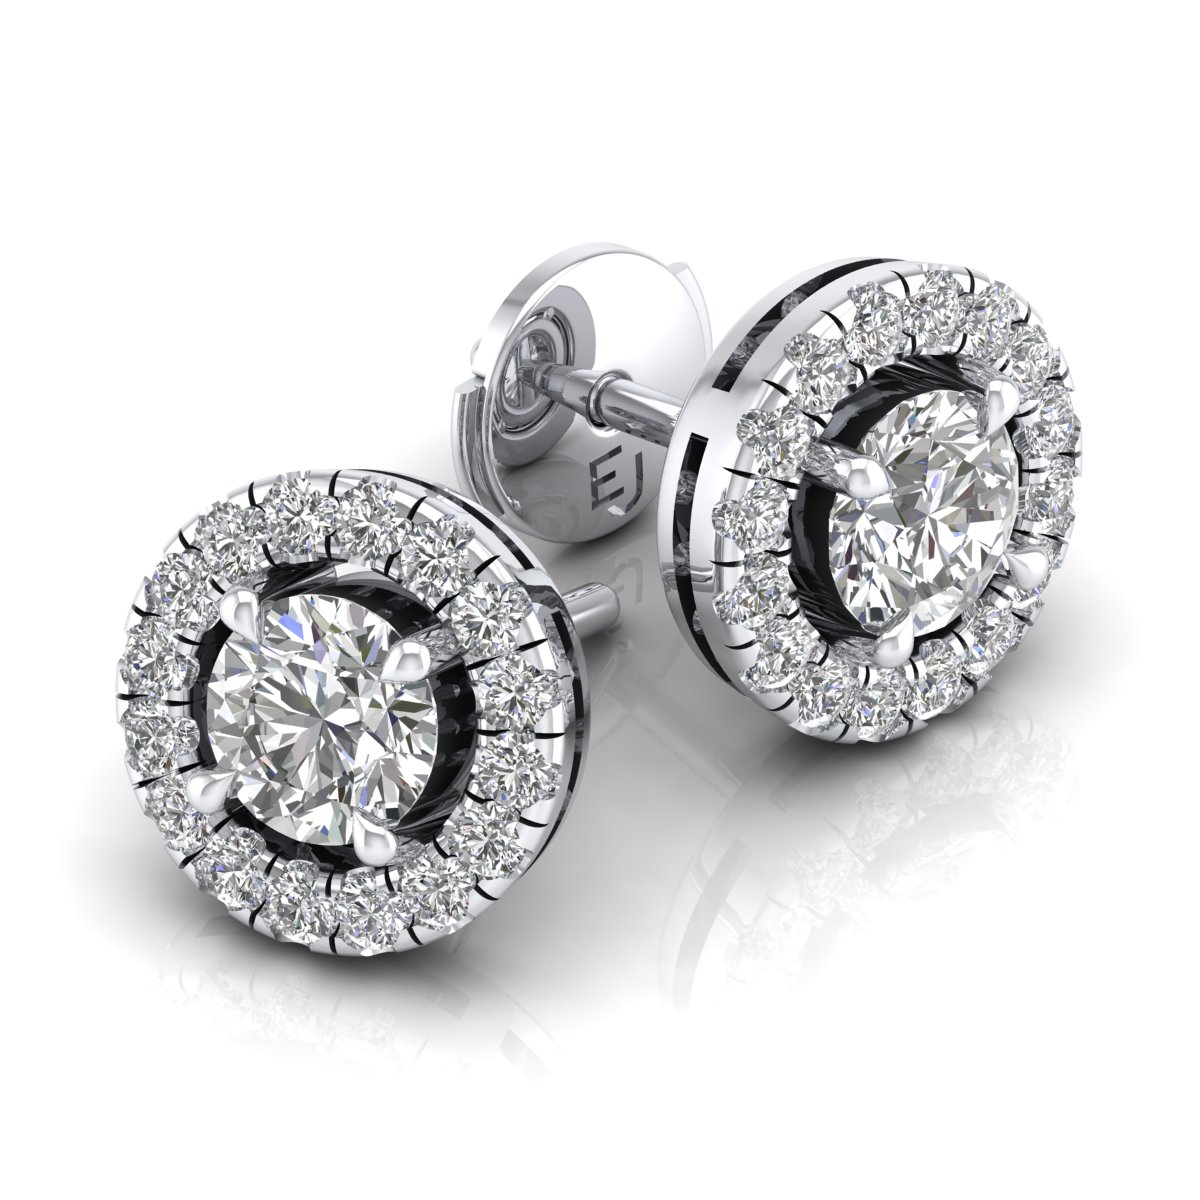 Real Diamonds Daily Wear CVD Diamond Round Cut Halo Stud Earring For Women,  3.20gm at Rs 73279.99/pair in Surat